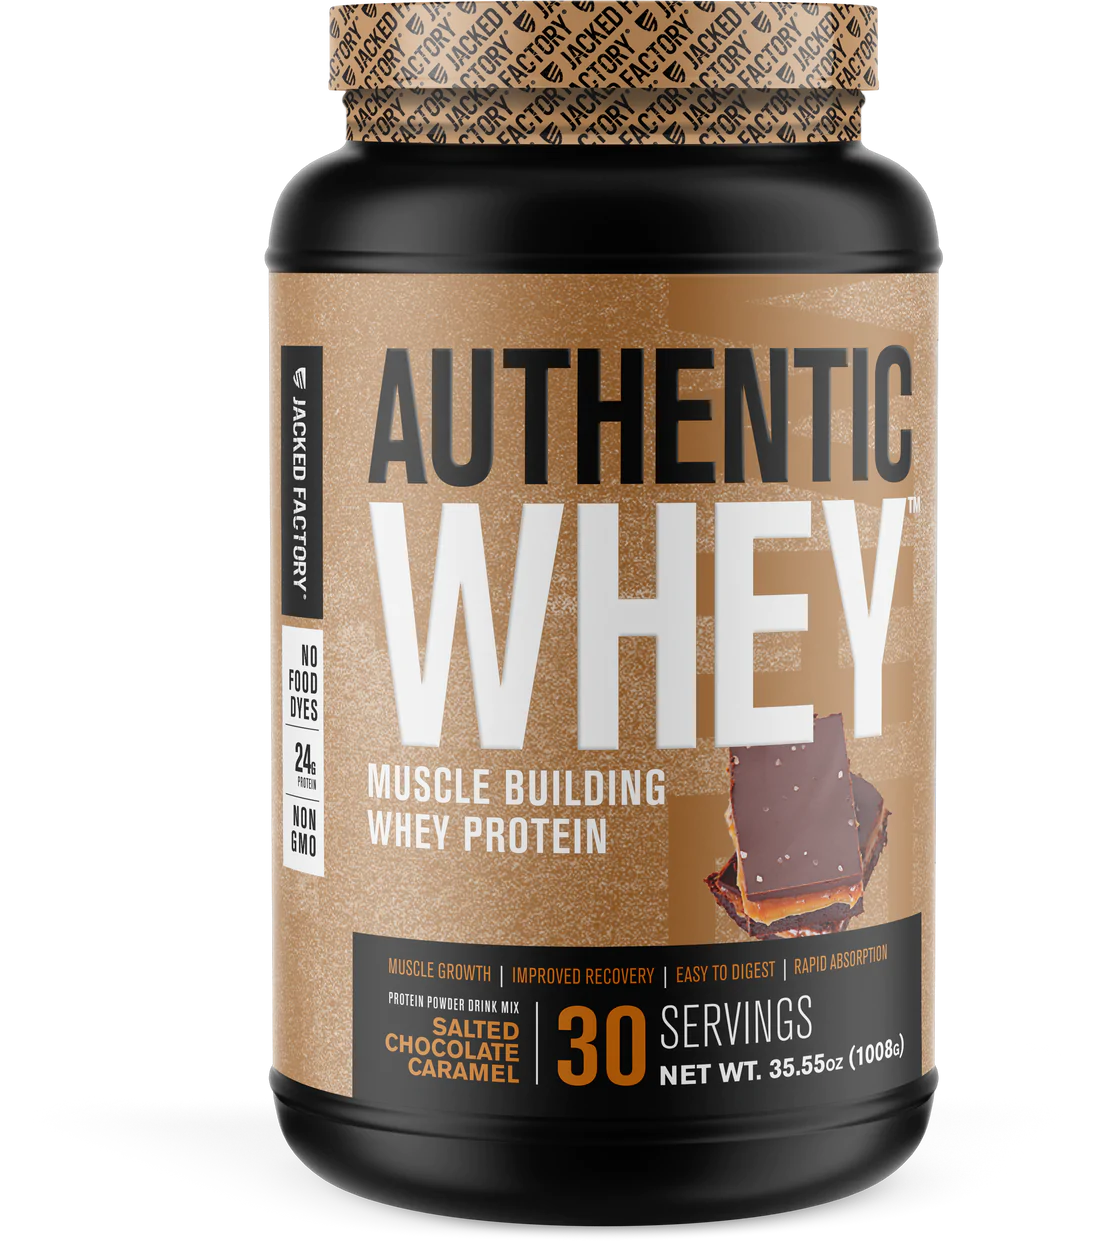 Protein thực phẩm bổ sung đạm Authentic Whey “Jacked Factory” : Made in USA